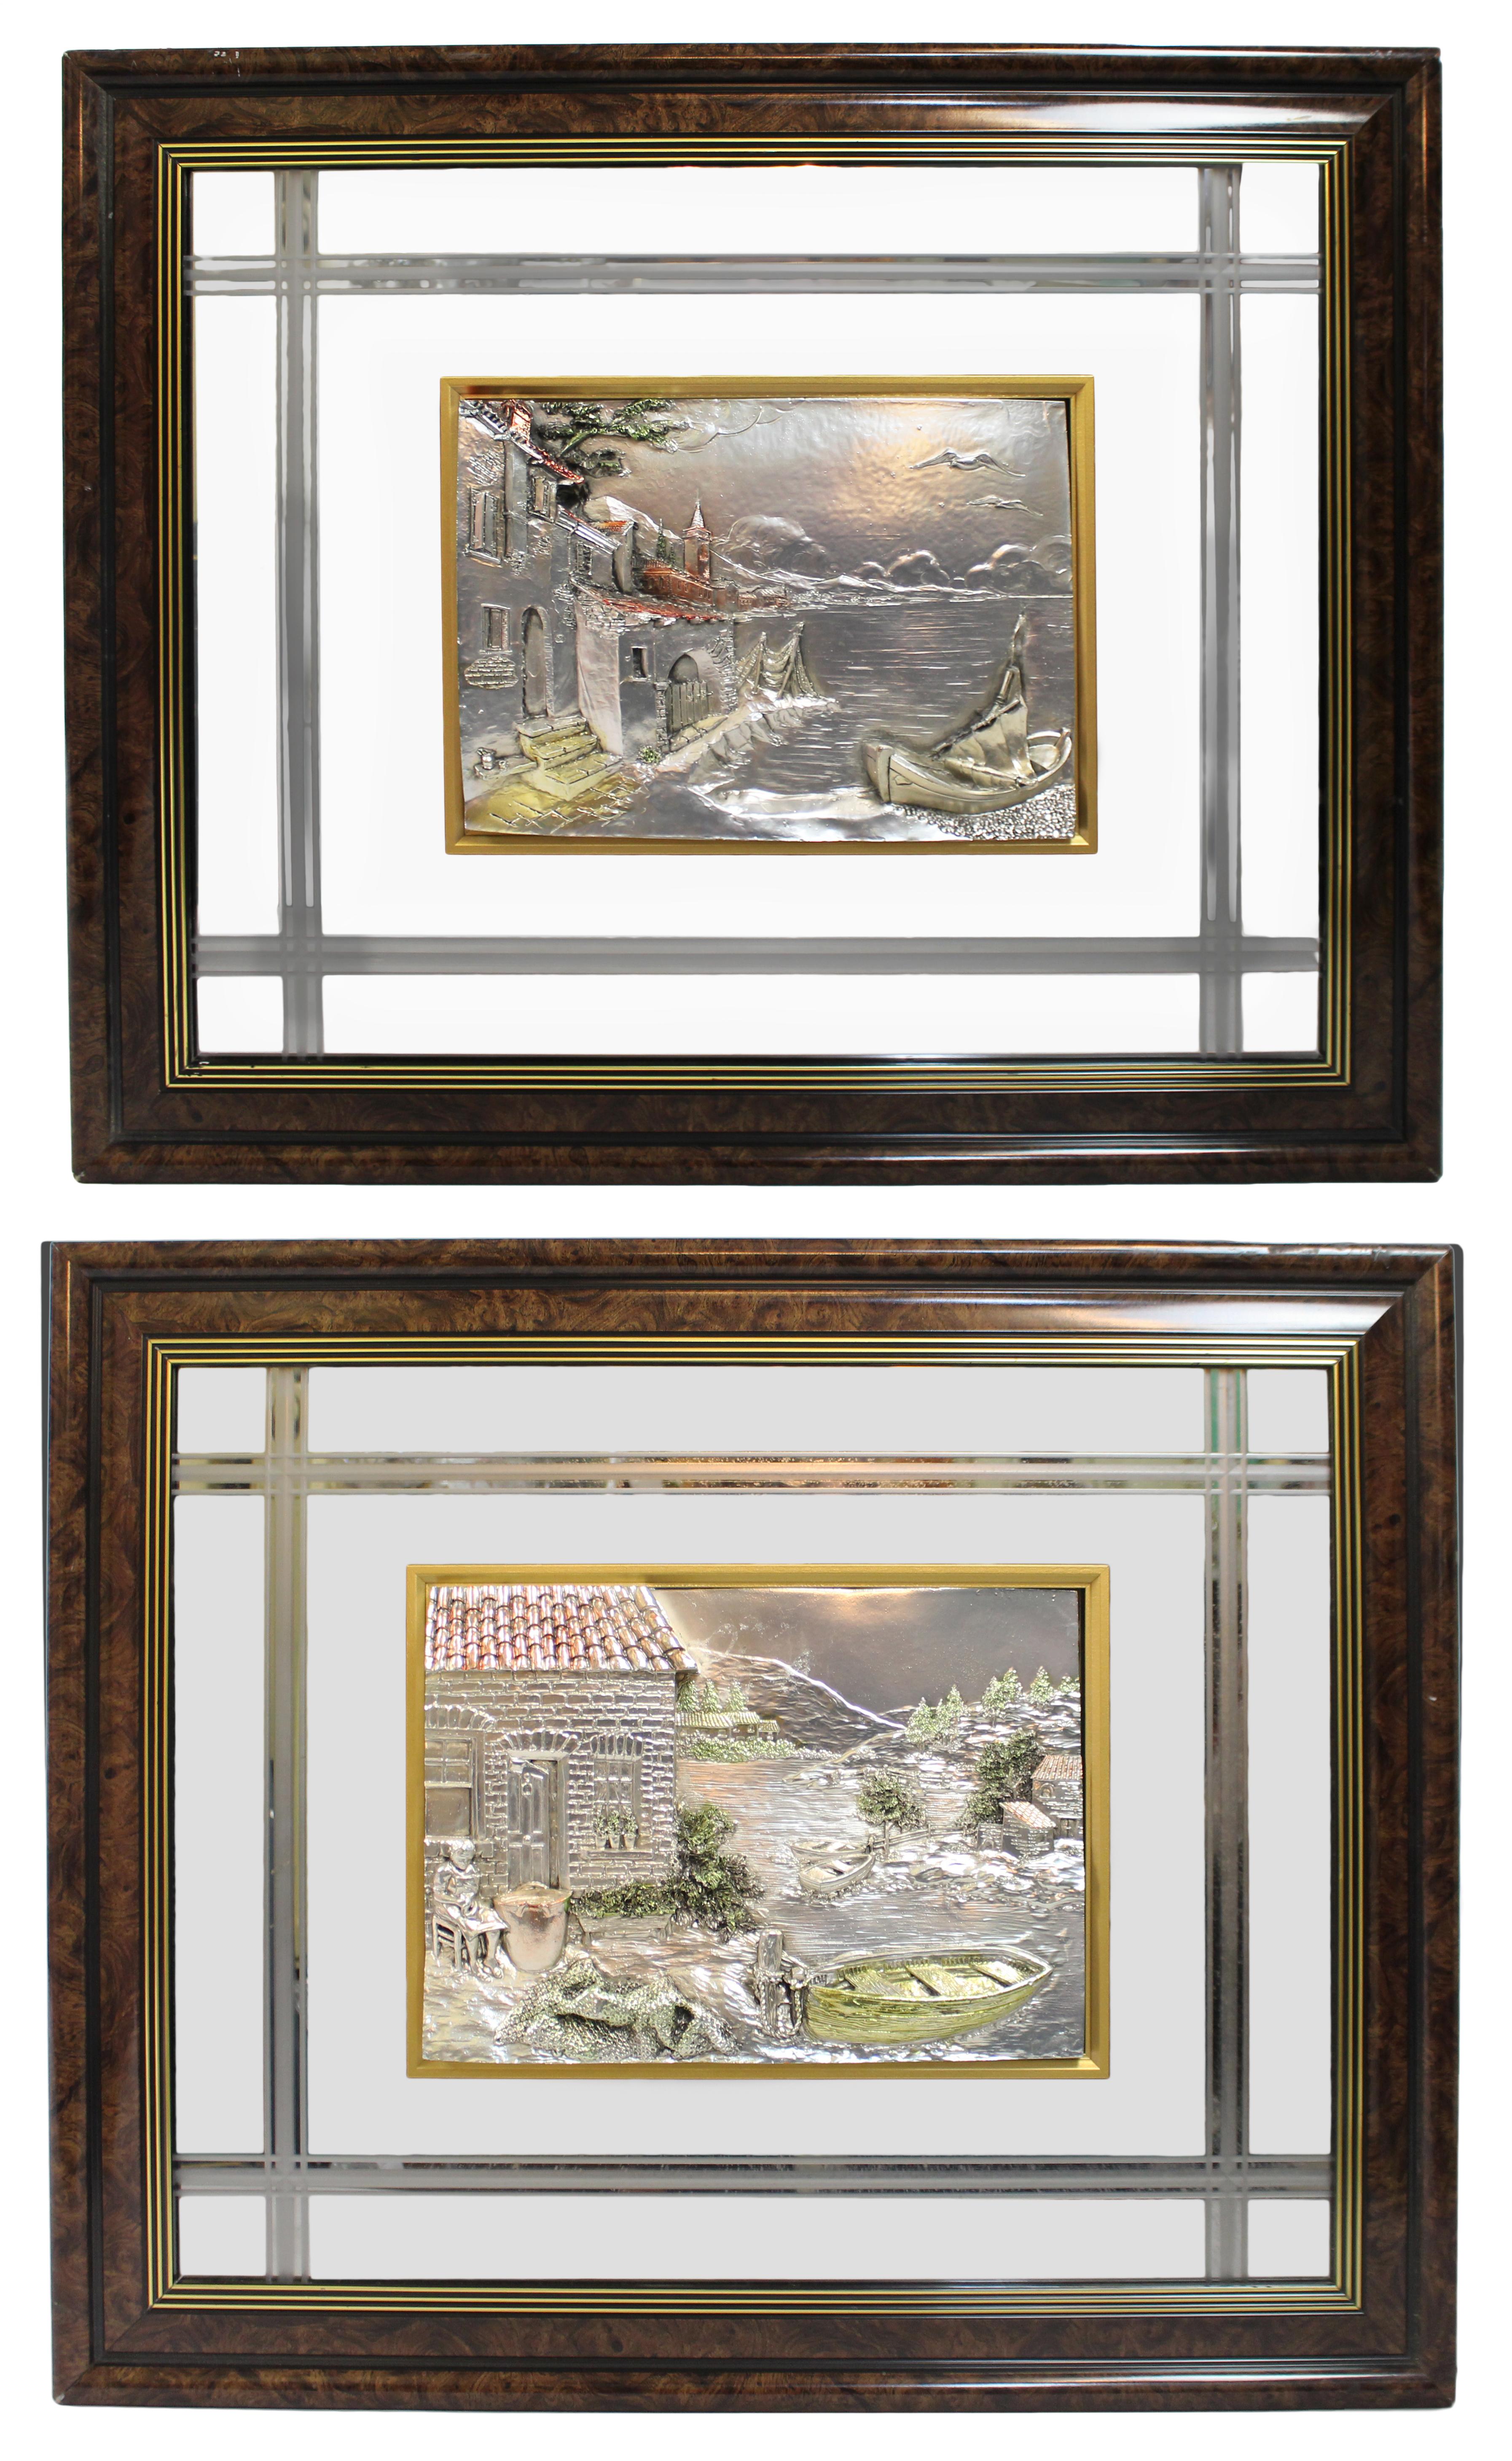 Pair of large Creazioni Artistiche relief silver artworks framed


Creazioni Artistiche. 

Gilded & bronzed silver relief seaside artworks with gold surround. 

Decorative mirror Mounts. Set in wood effect frames. 

Both frames measure 72 x